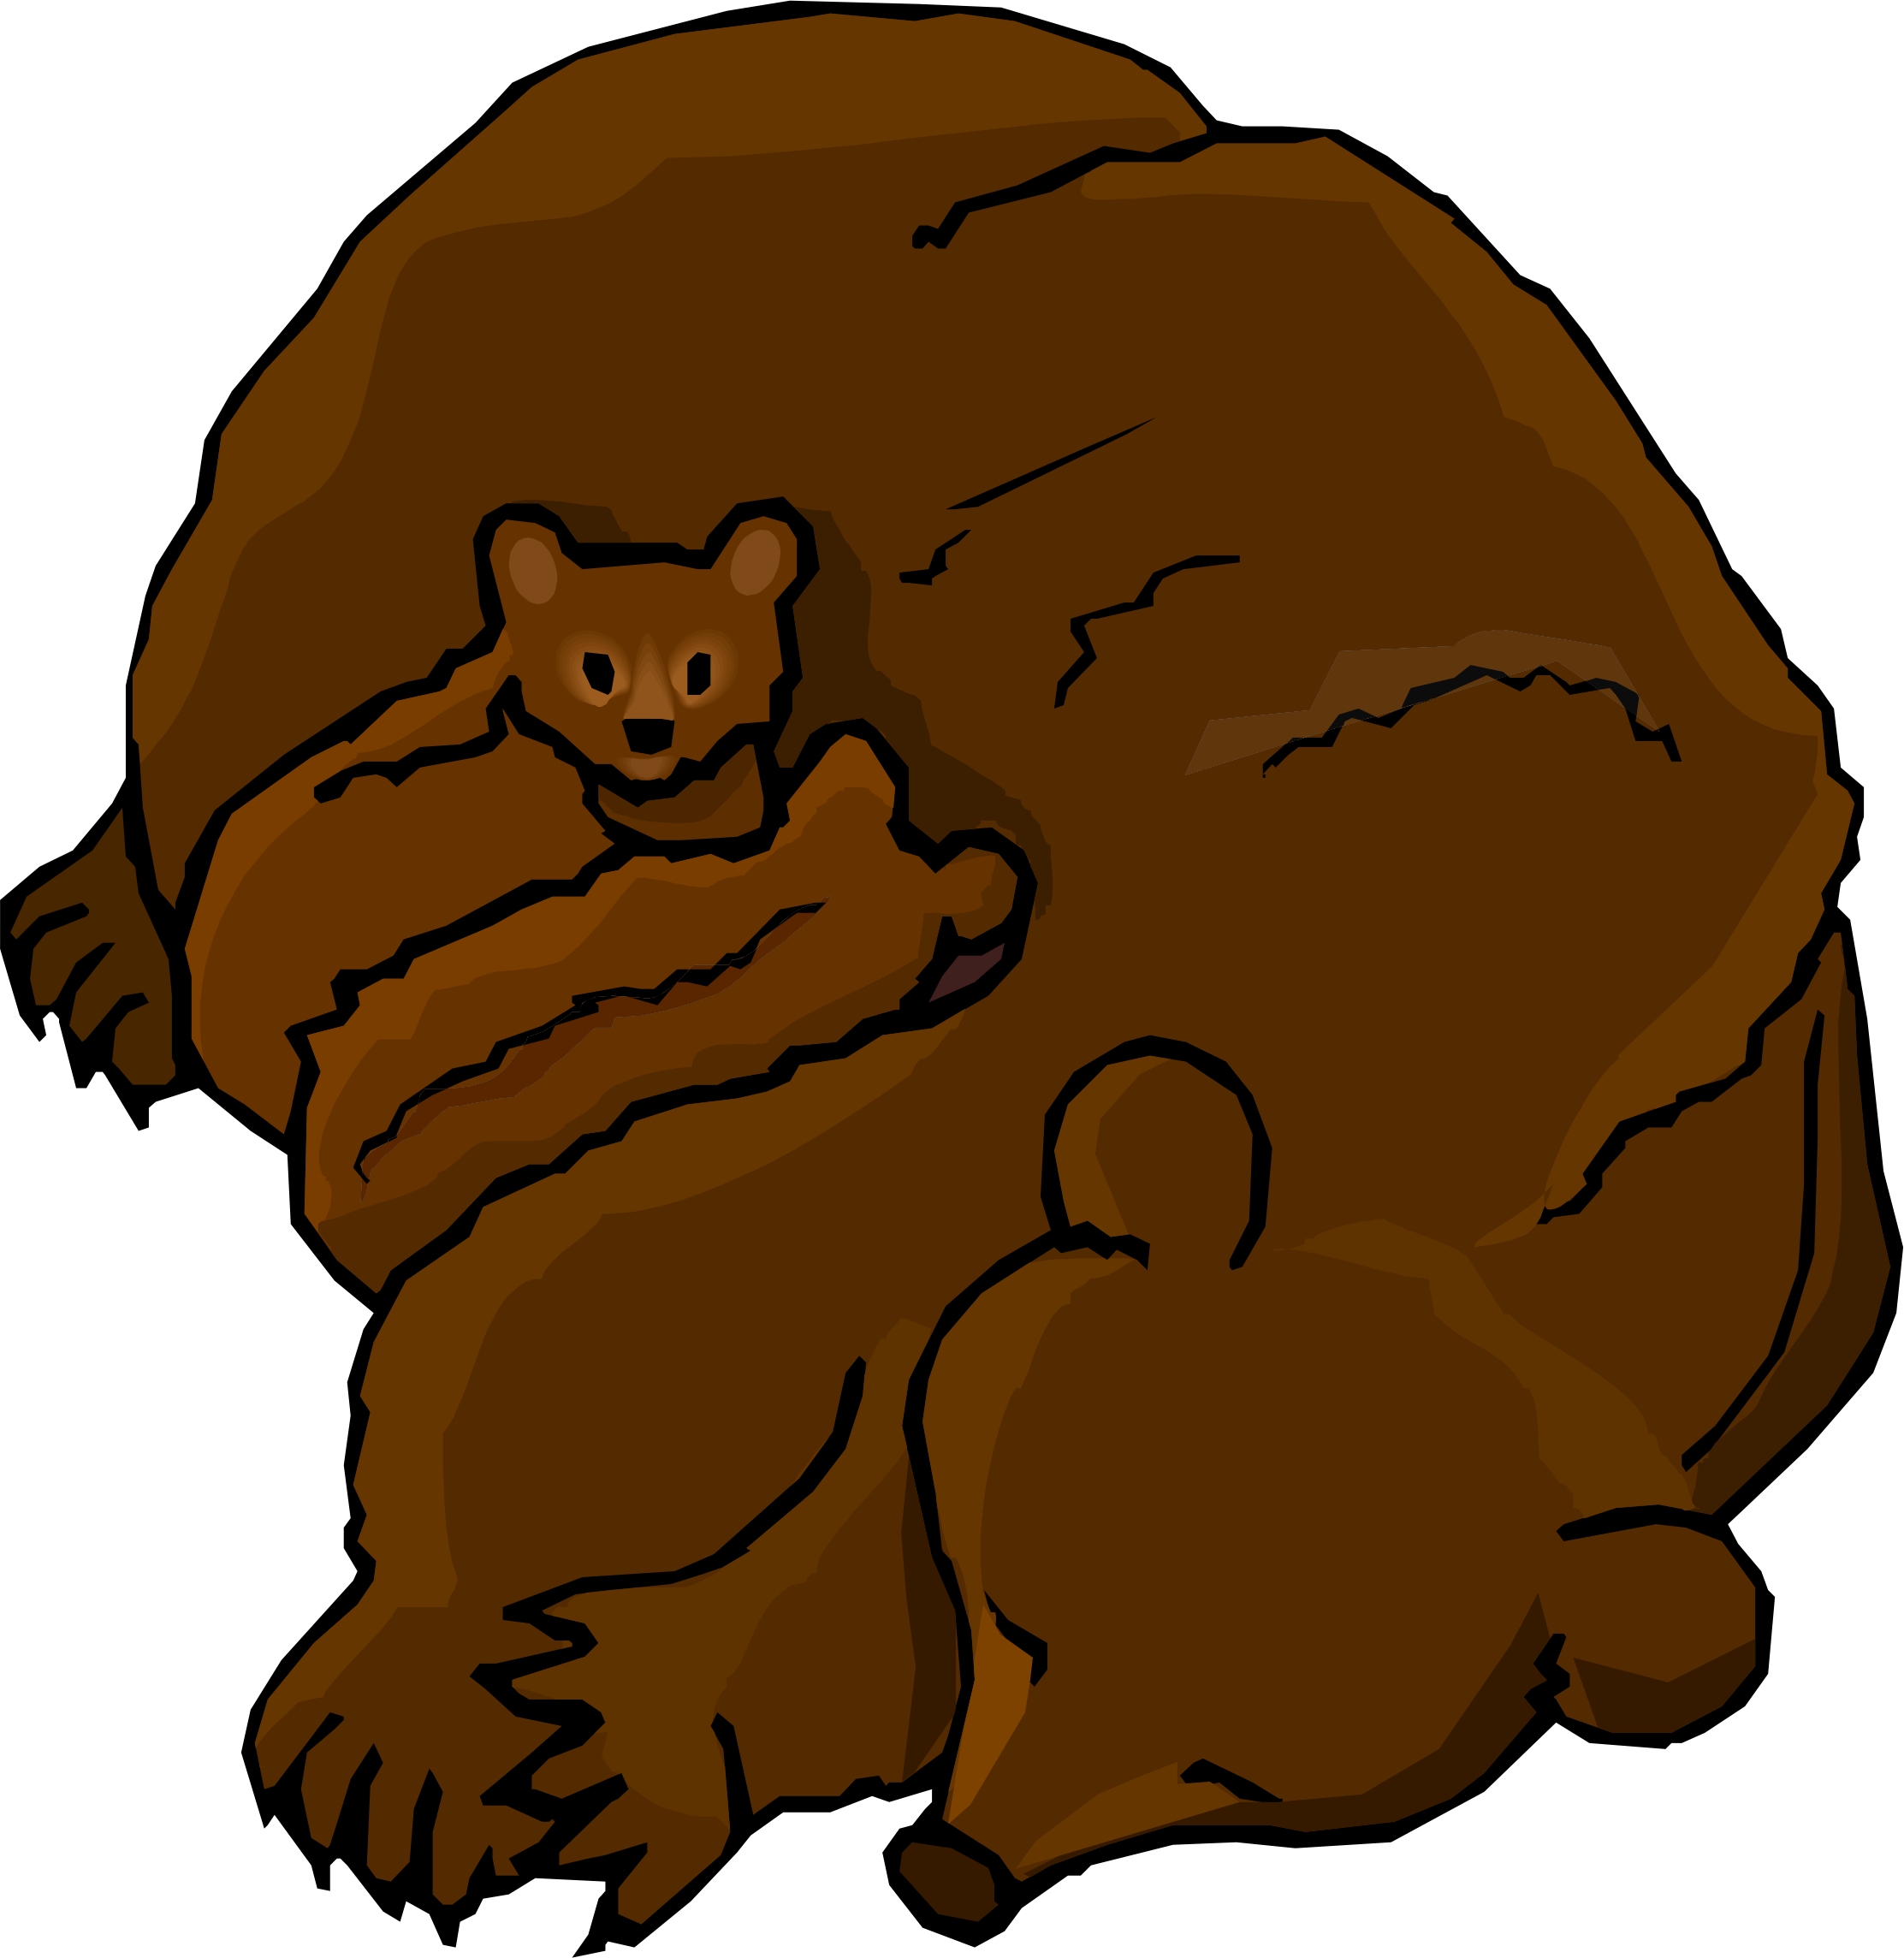 Grizzly bear bear clip art grizzly clipart for you image ...